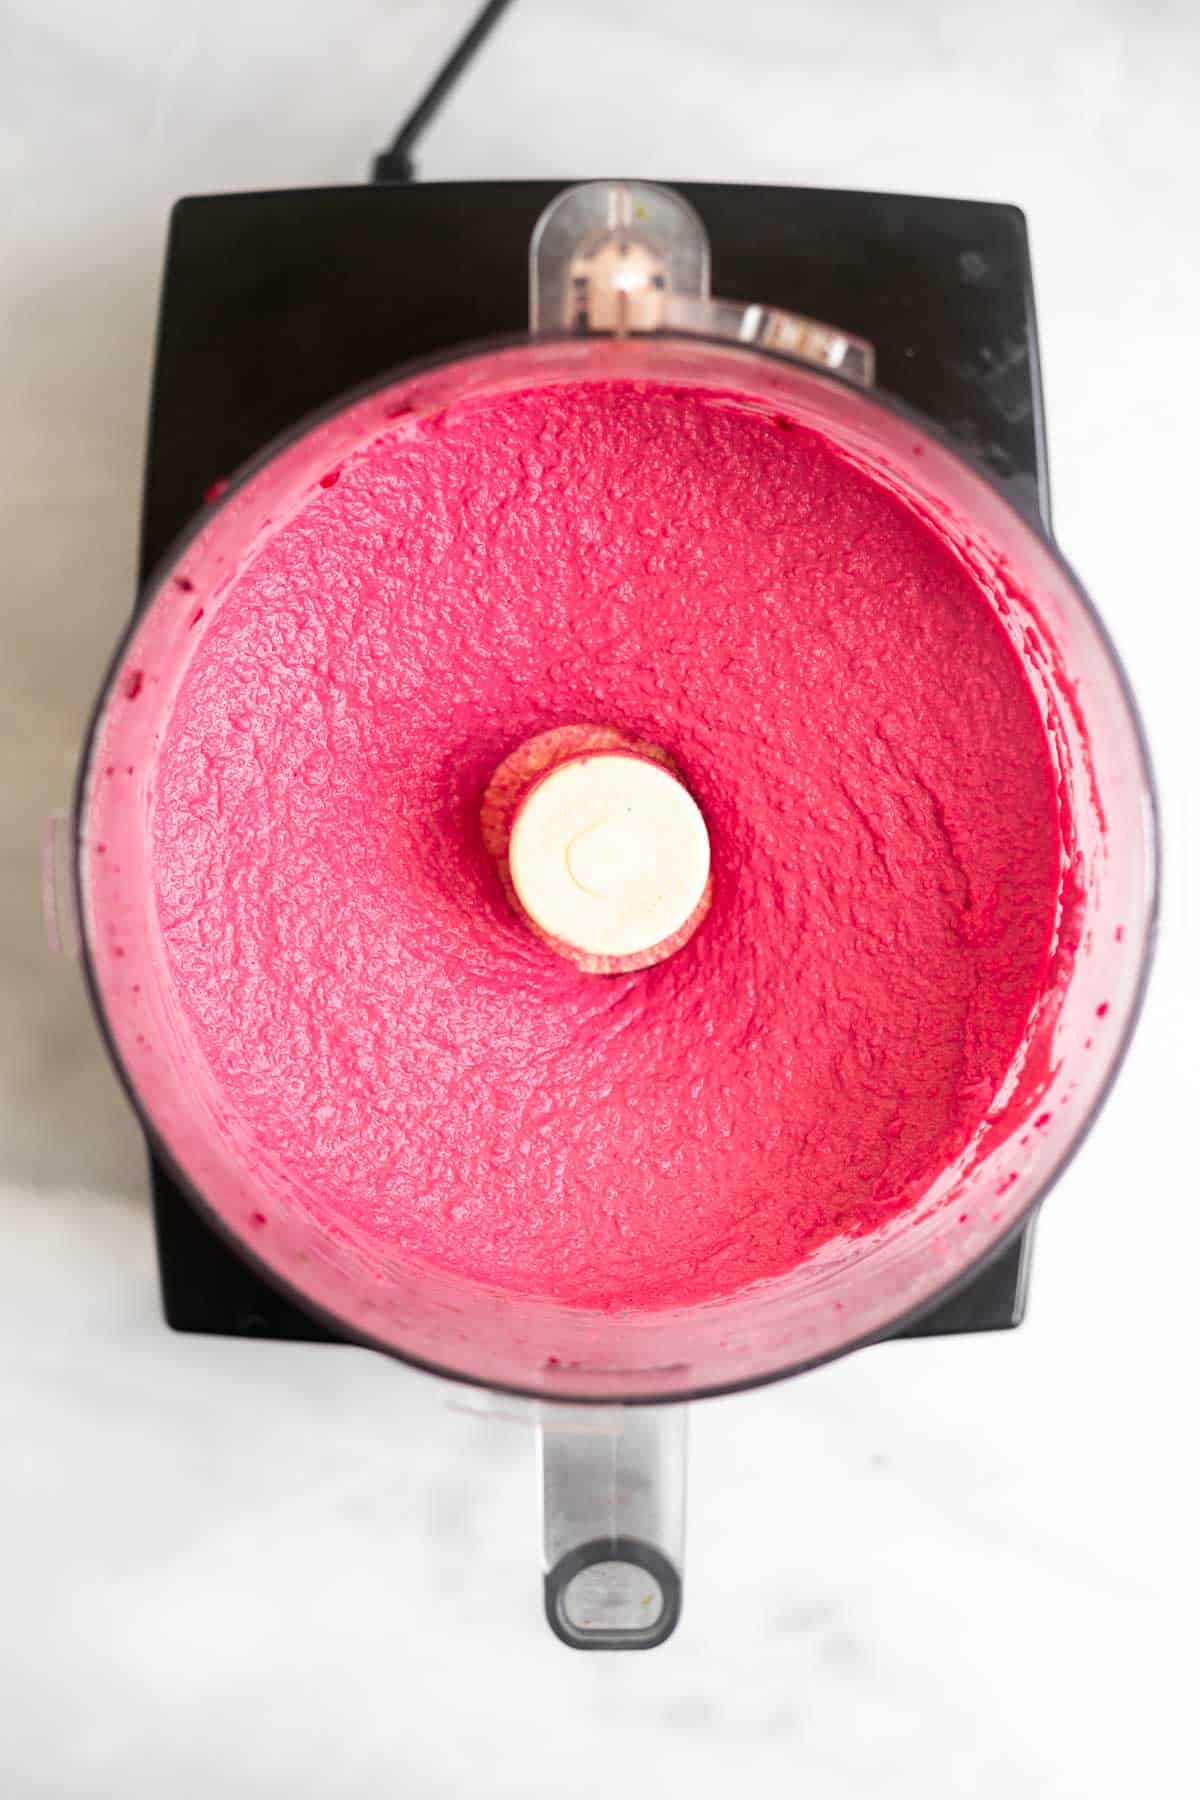 beetroot hummus in the food processor after blending